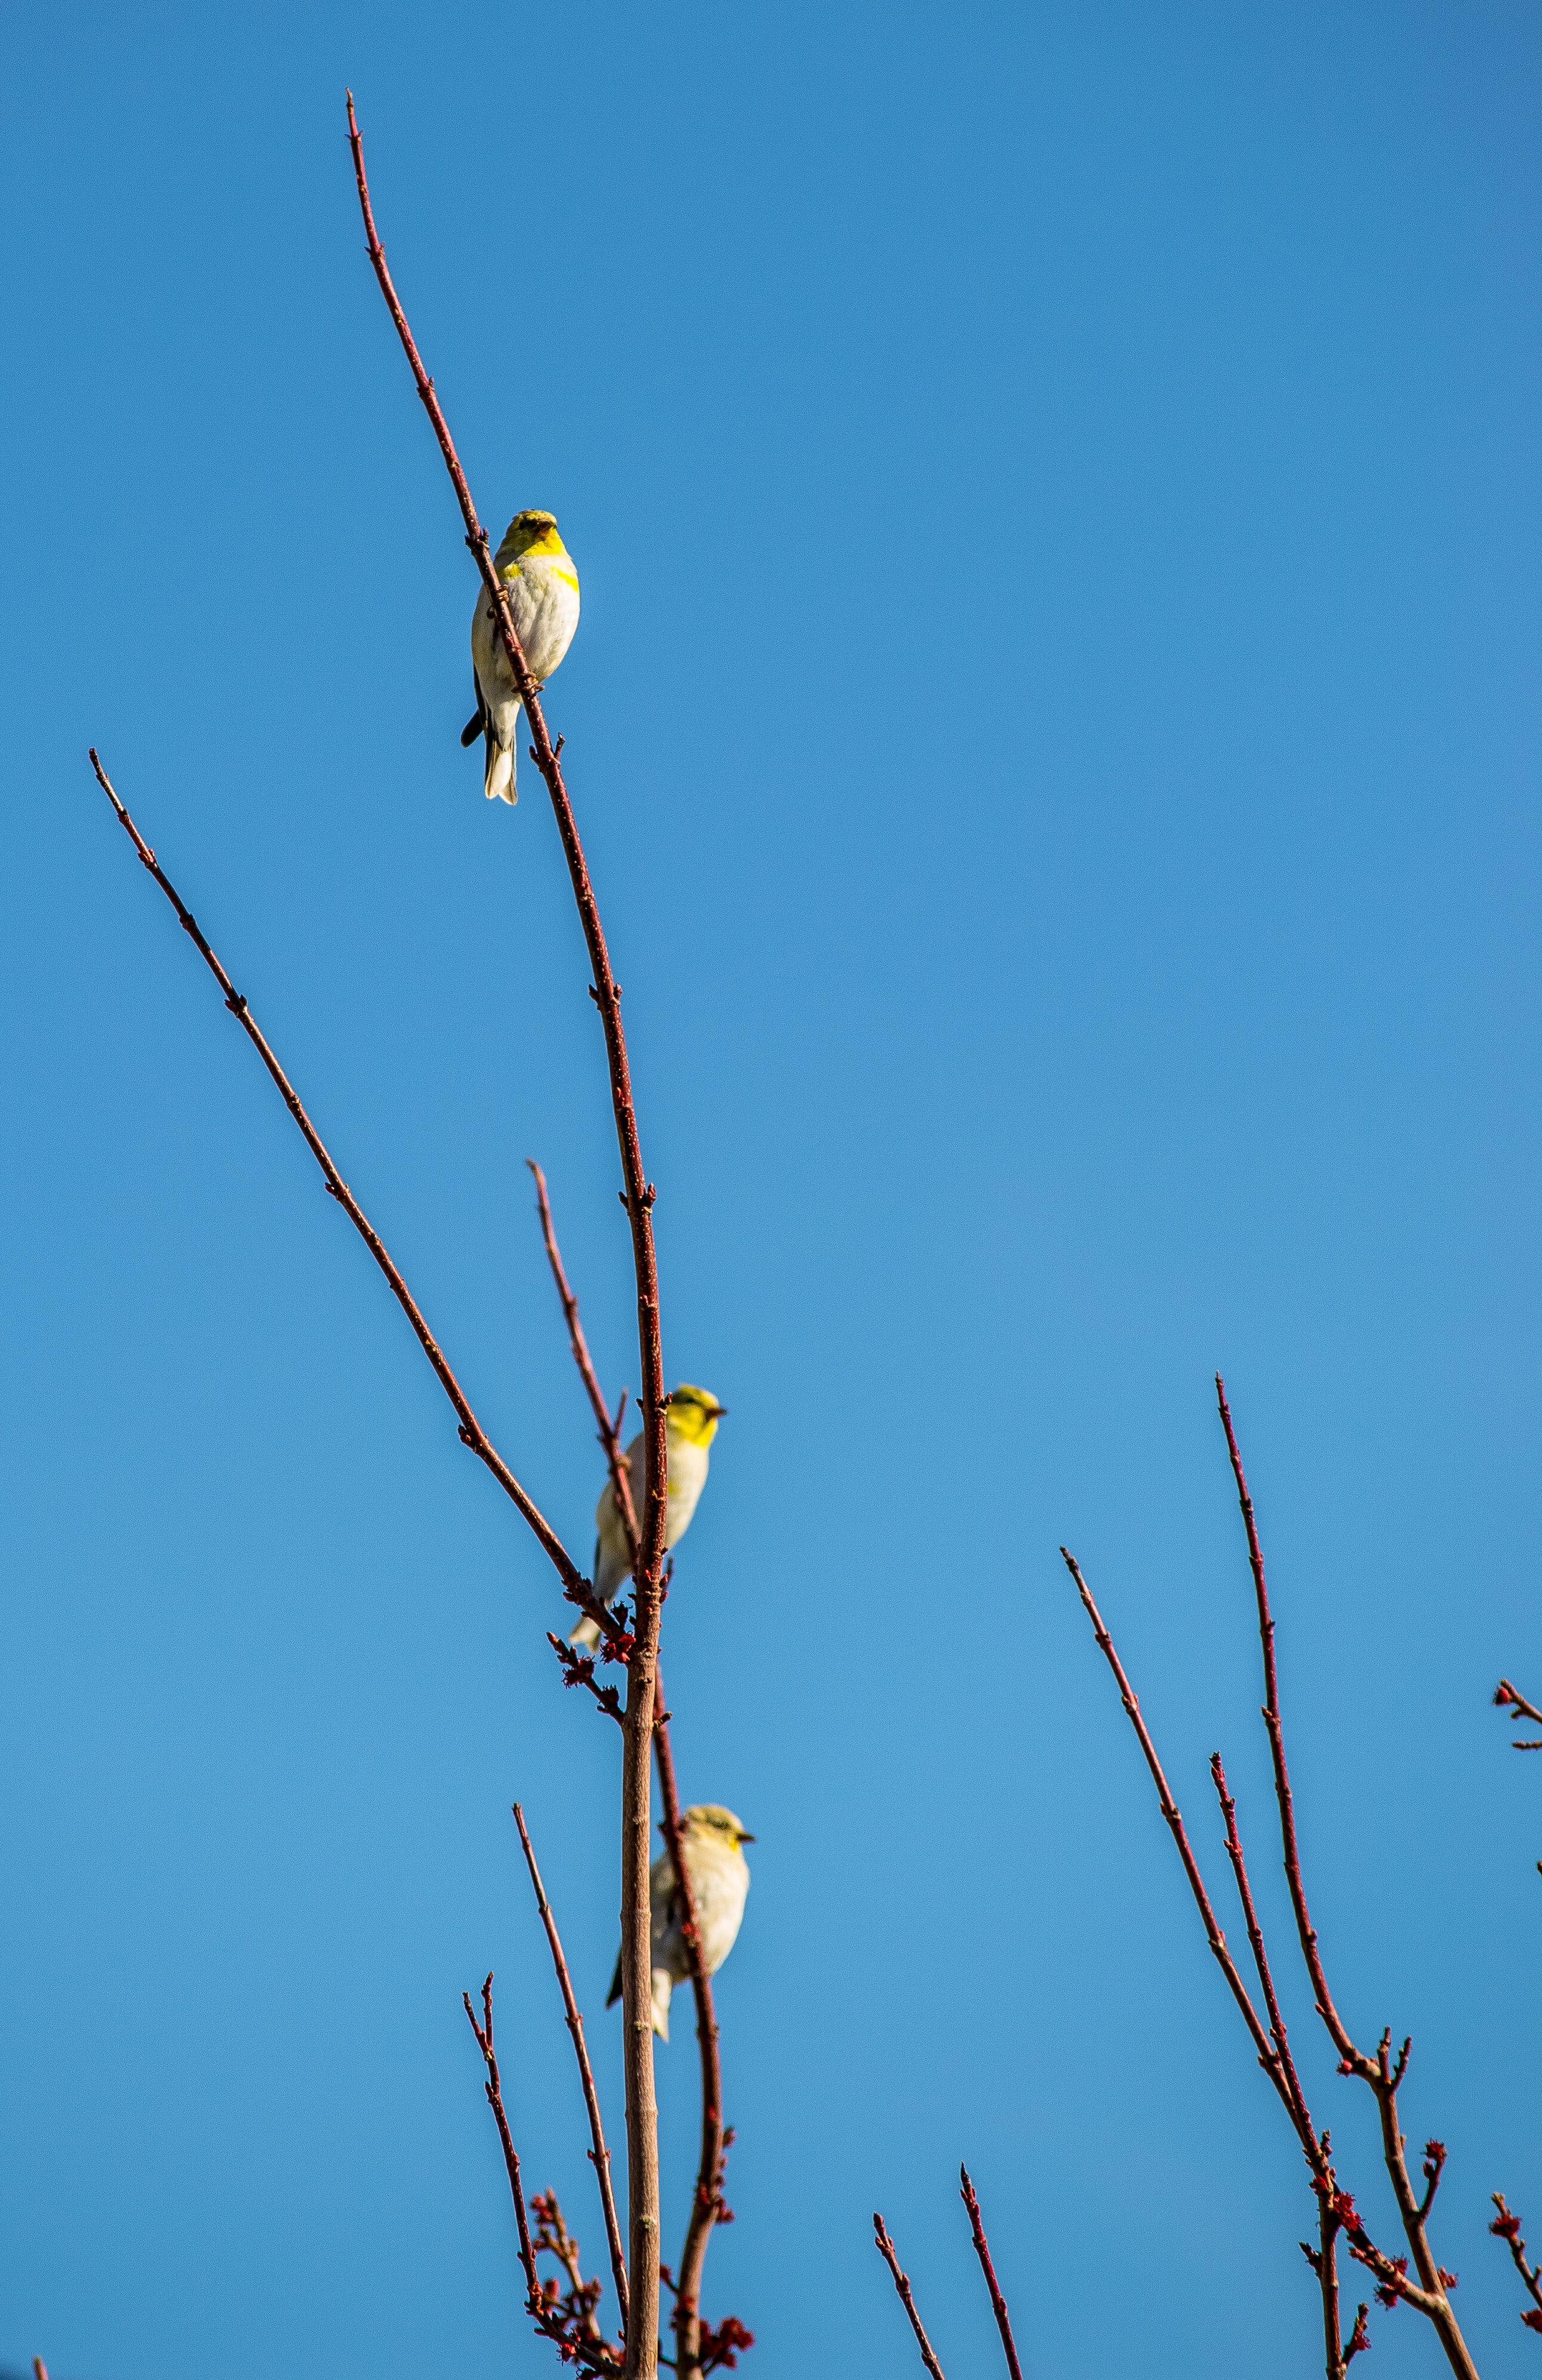 Three birds sit on branches with red berries photo